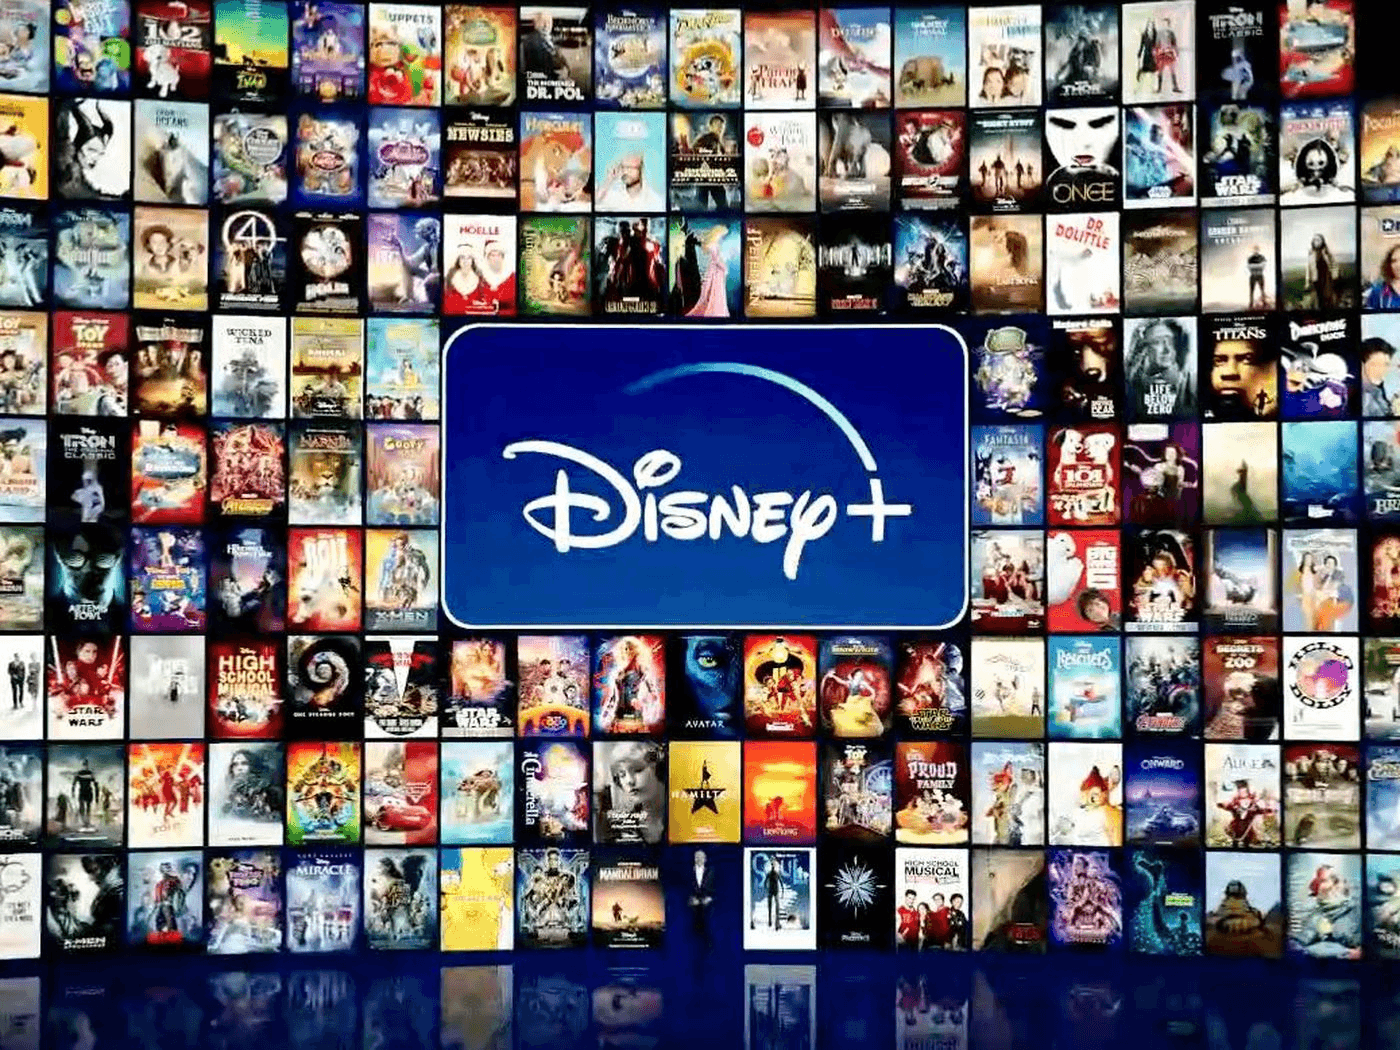 Watch Disney Plus with National Geographic, Star Wars, Marvel and exclusive content on your smart TV. A few reasons why Disney Plus account management can be easy.